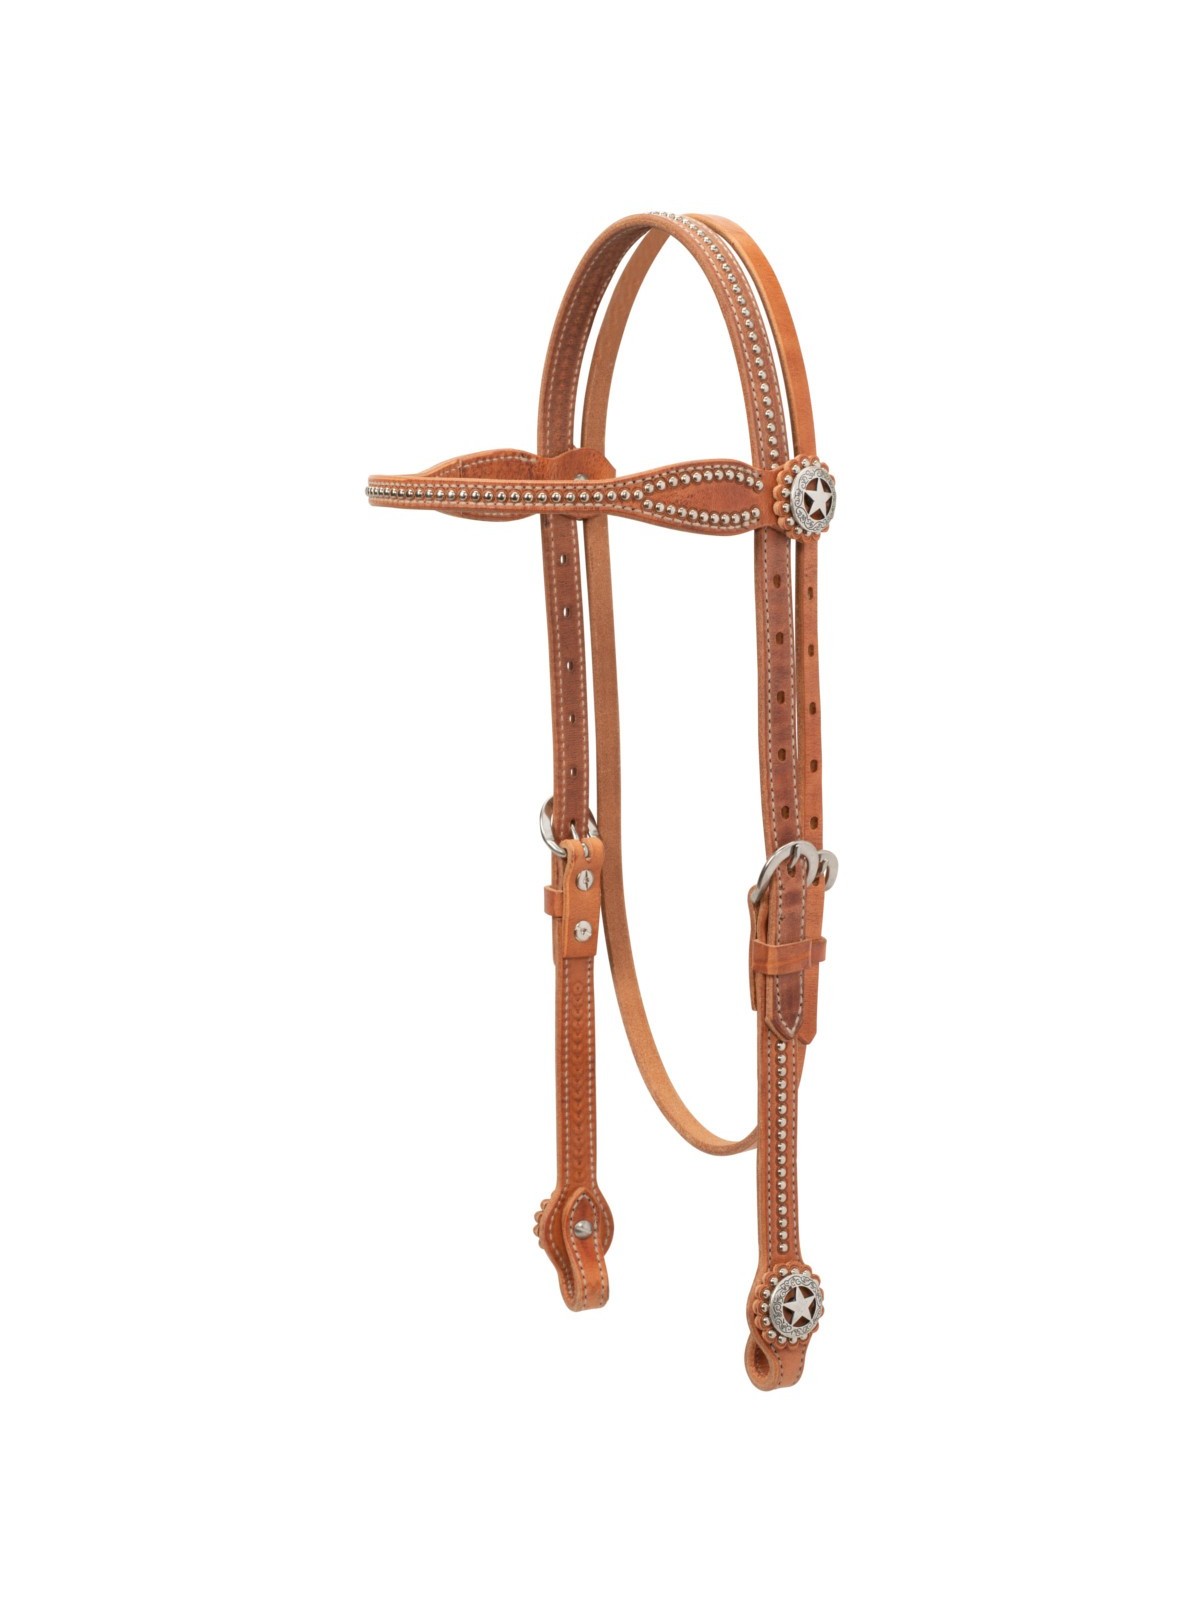 Texas Star Harness Leather Browband Headstall